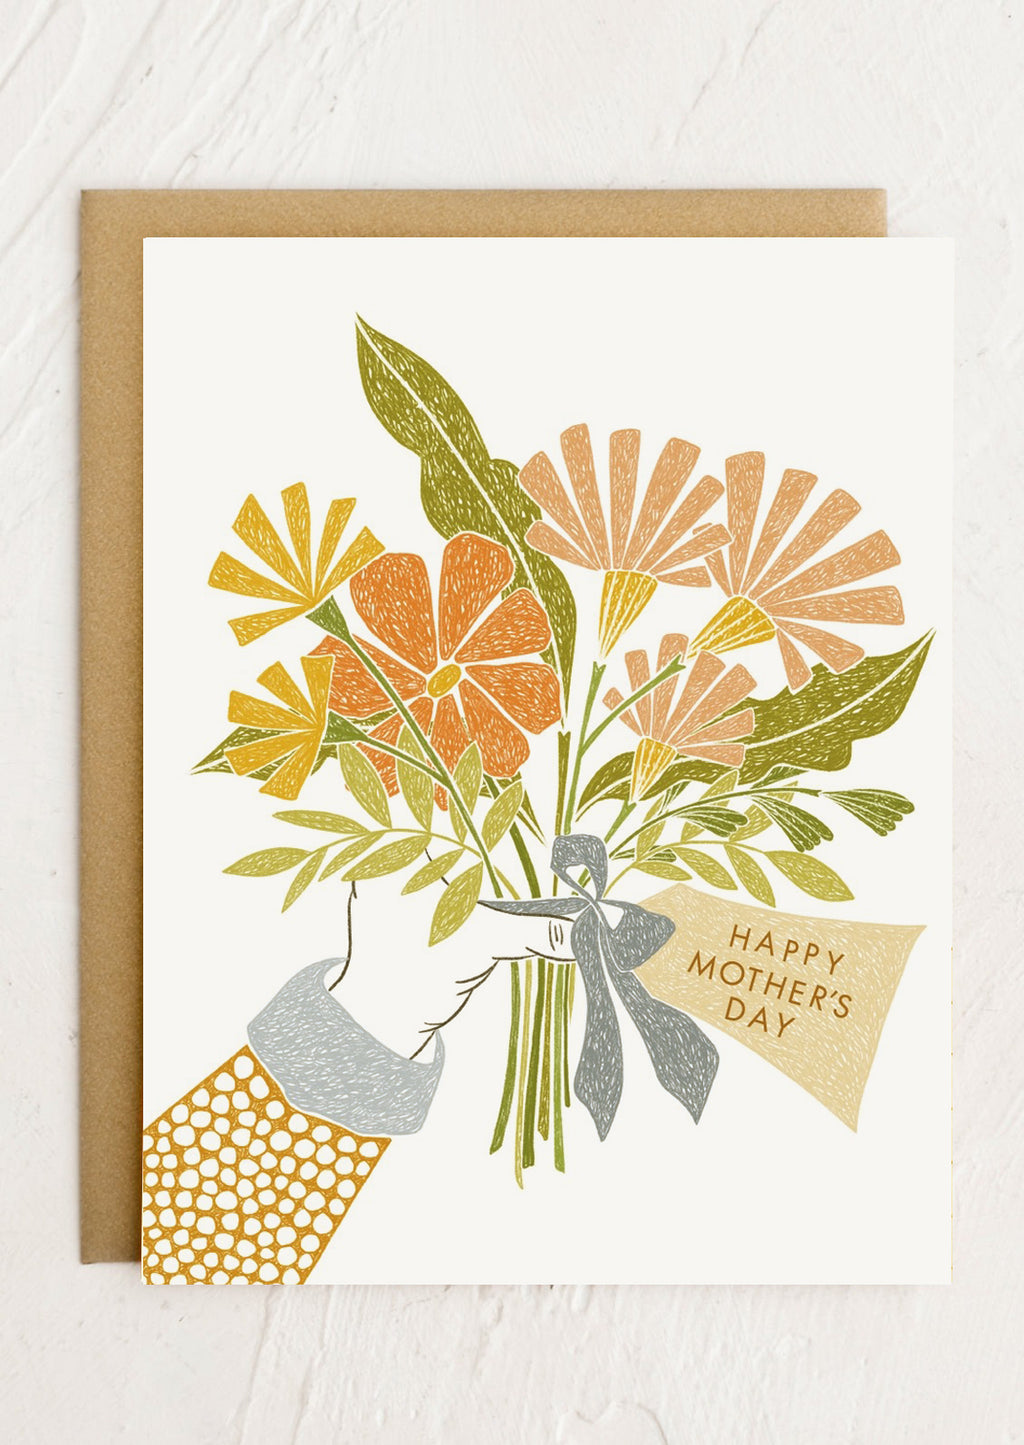 1: A card with illustration of hand holding bouquet of flowers, text reads "Happy Mother's Day".